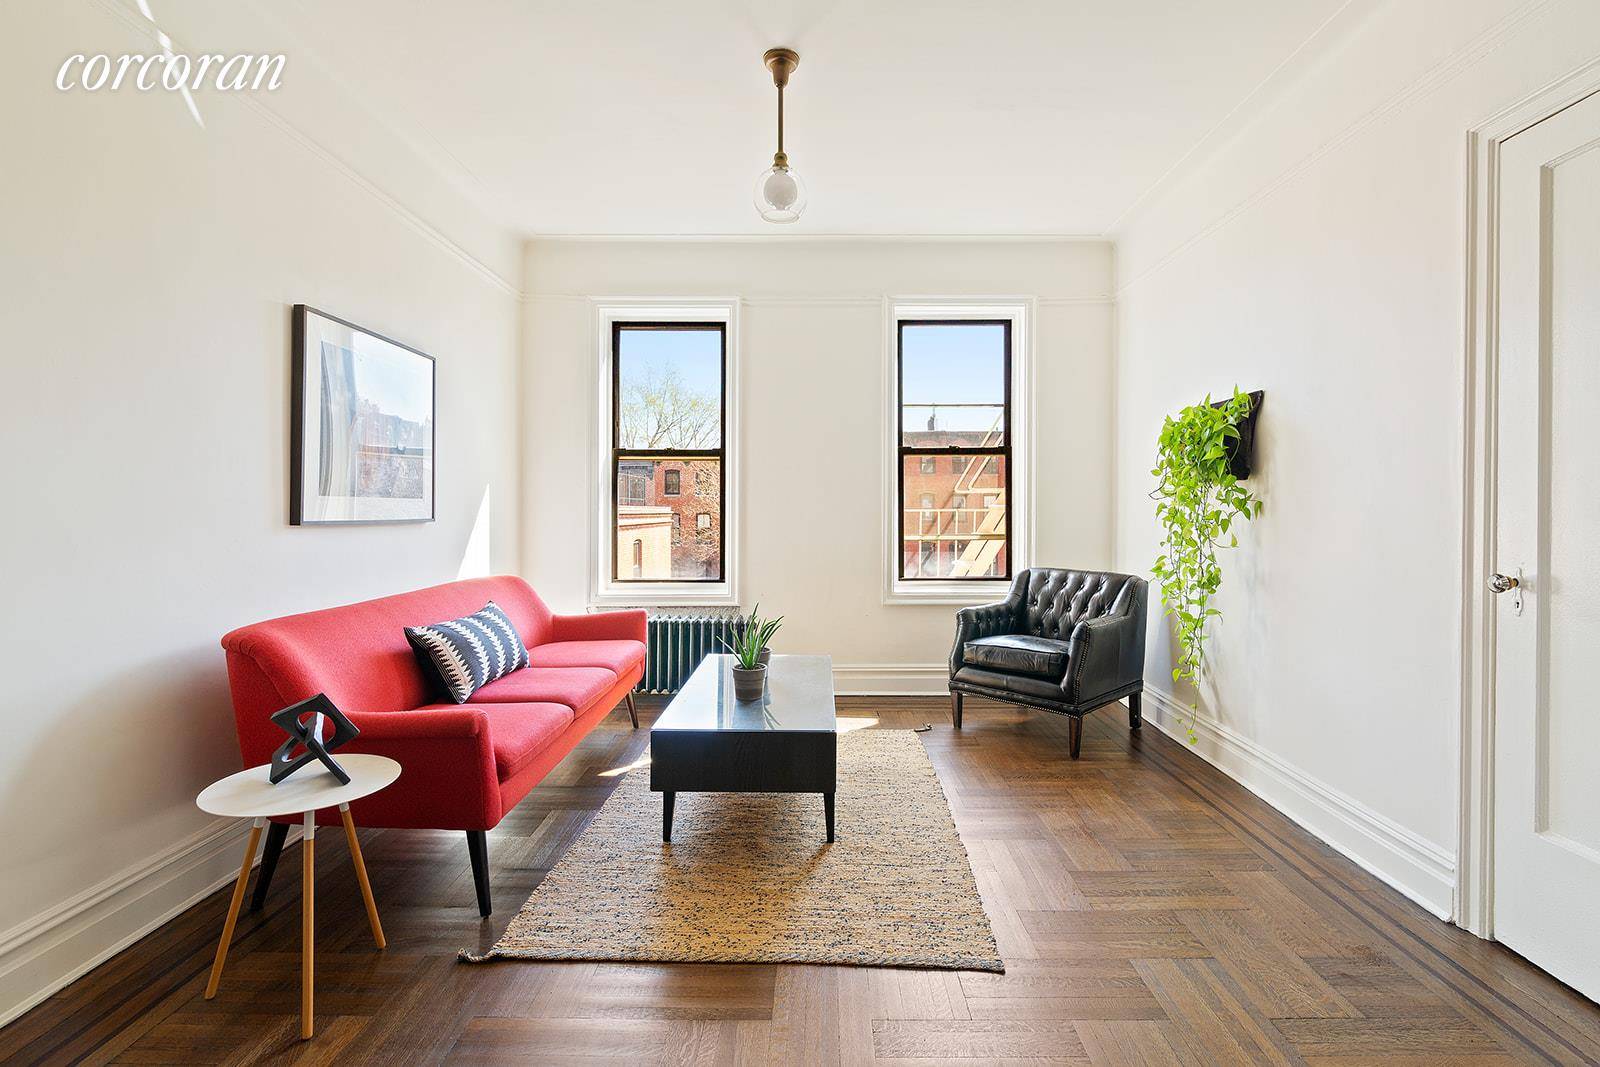 Welcome to 451 Clinton Ave, a handsome one bedroom co op apartment on the renowned Mansion Row in Clinton Hill.